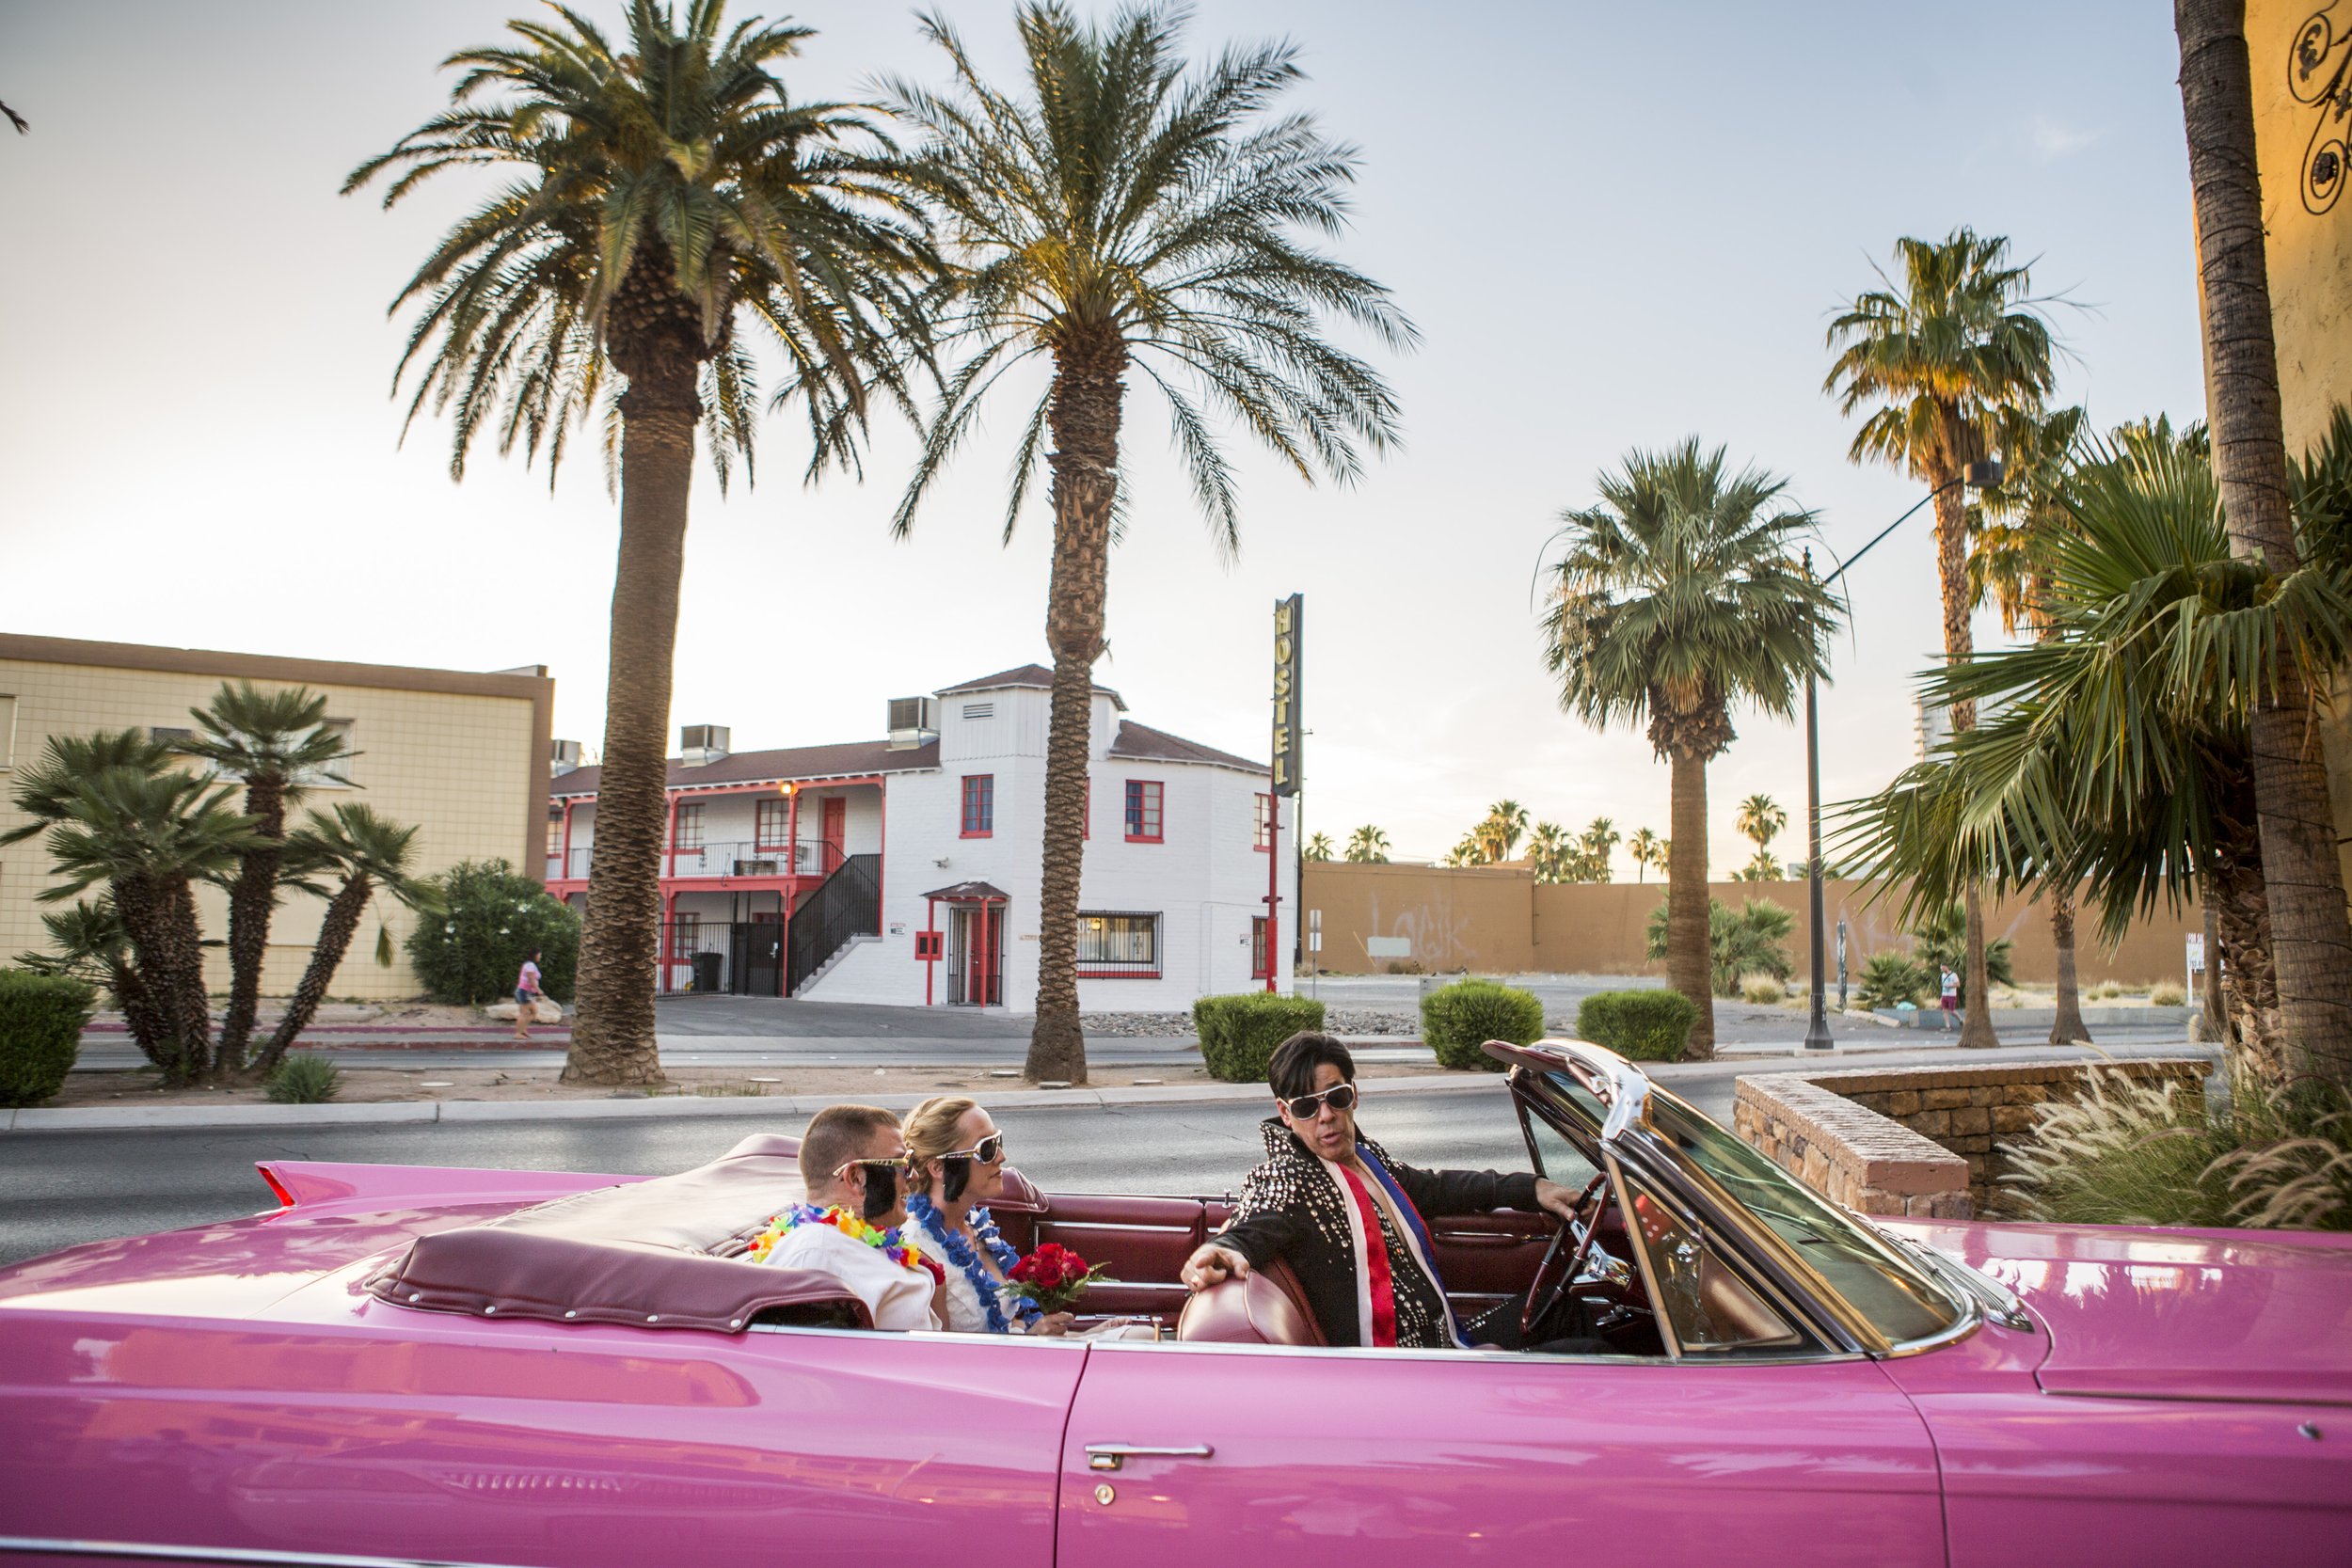  Ron Decar, owner of Viva Las Vegas and dressed as Elvis, drives Missie Berry and Robert Moseley into the chapel to renew their wedding vows at the Viva Las Vegas Wedding Chapel. 